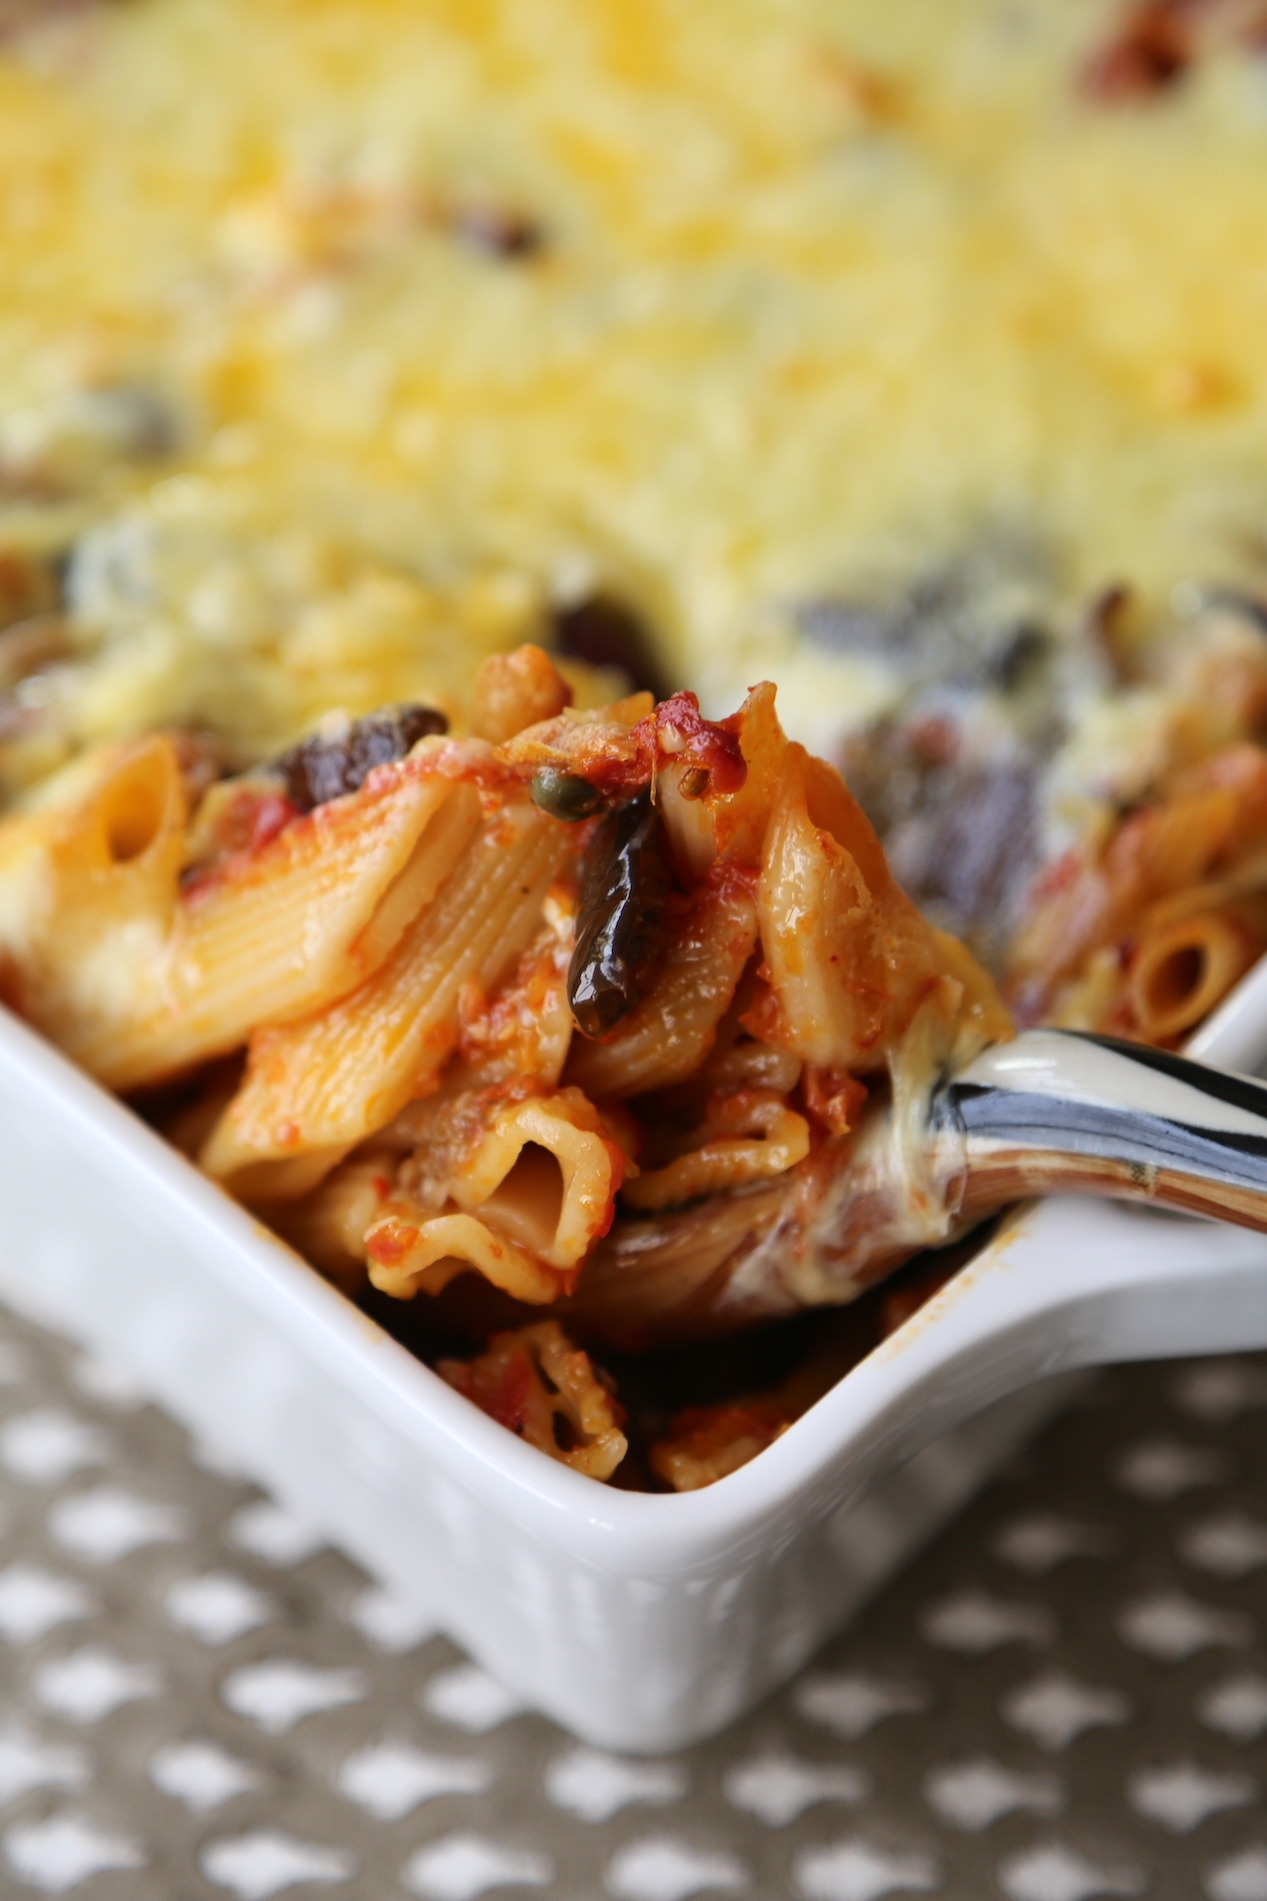 Baked Penne with eggplant, capers and tomatoes